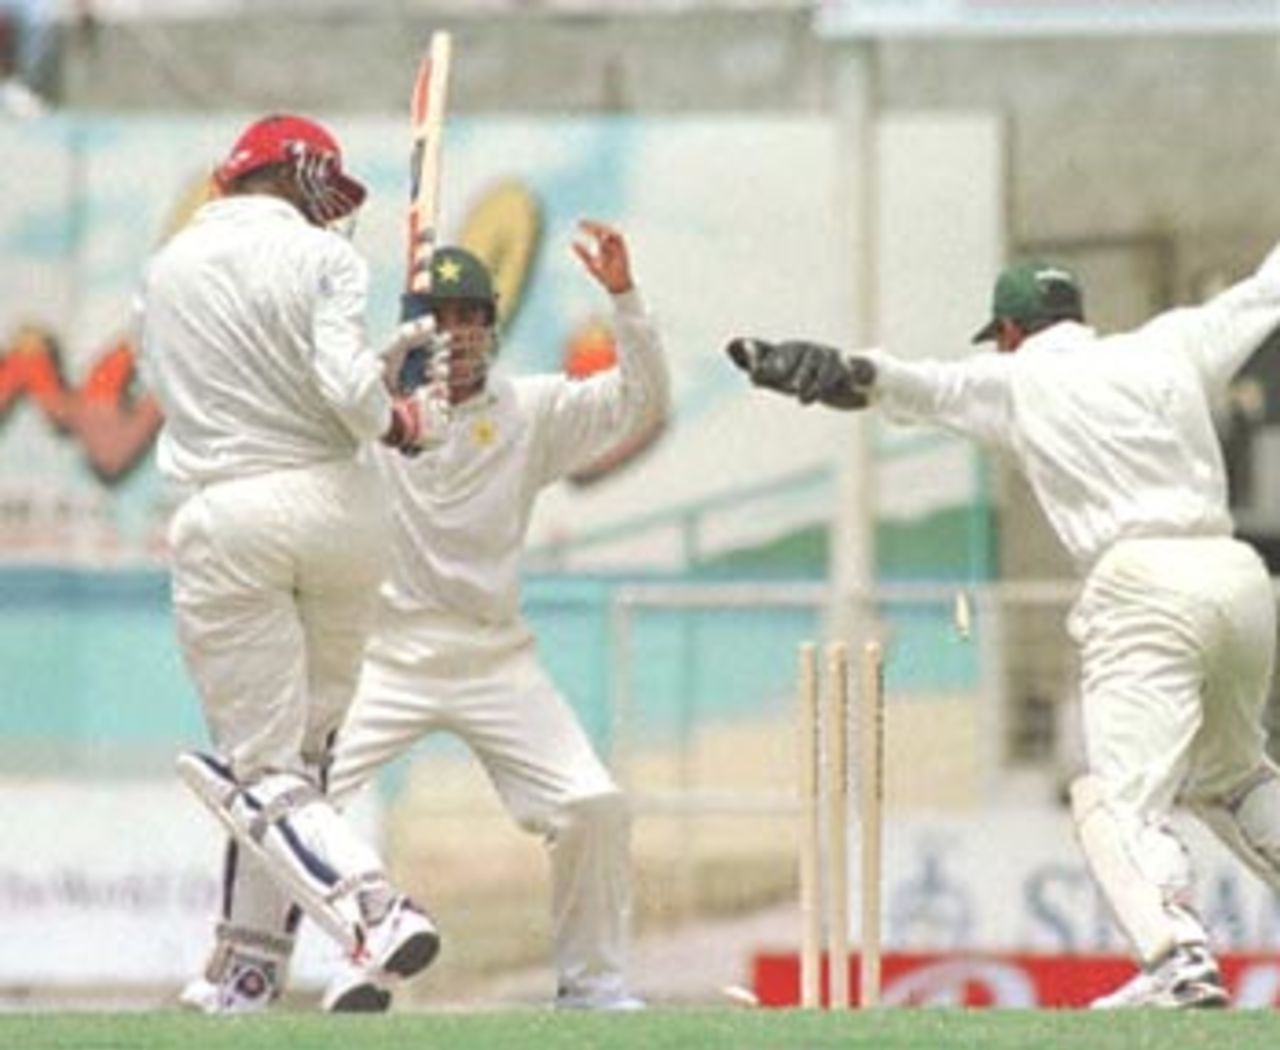 The West Indies' A. Griffith (L) is bowled by Pakistan's Mushtaq Ahmed (R) 26 May, 2000, during the second day of the third and deciding test against Pakistan. Pakistan in West Indies 1999/00, 3rd Test, West Indies v Pakistan, Antigua Recreation Ground, St John's, Antigua, (25-29 May 2000) Day 2